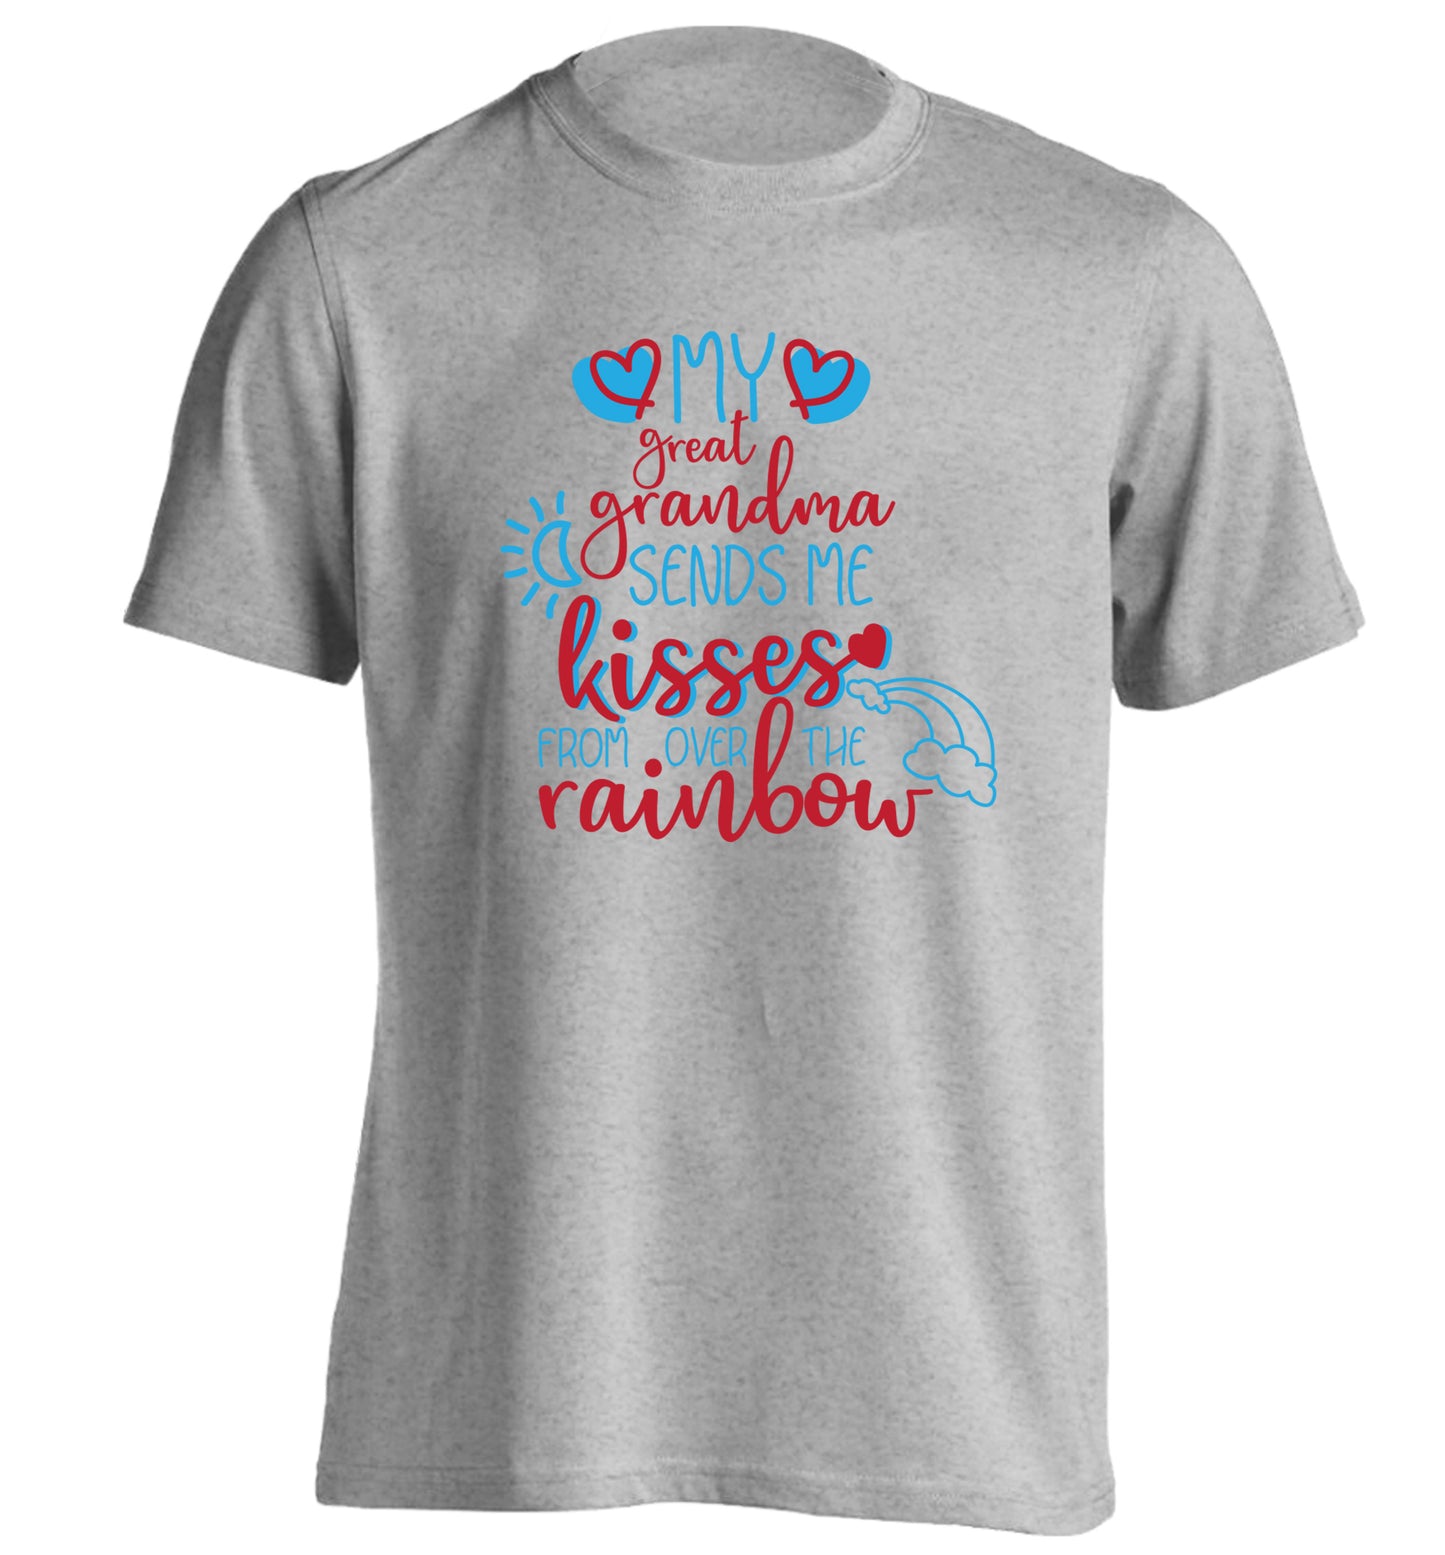 My great grandma sends me kisses from over the rainbow adults unisex grey Tshirt 2XL